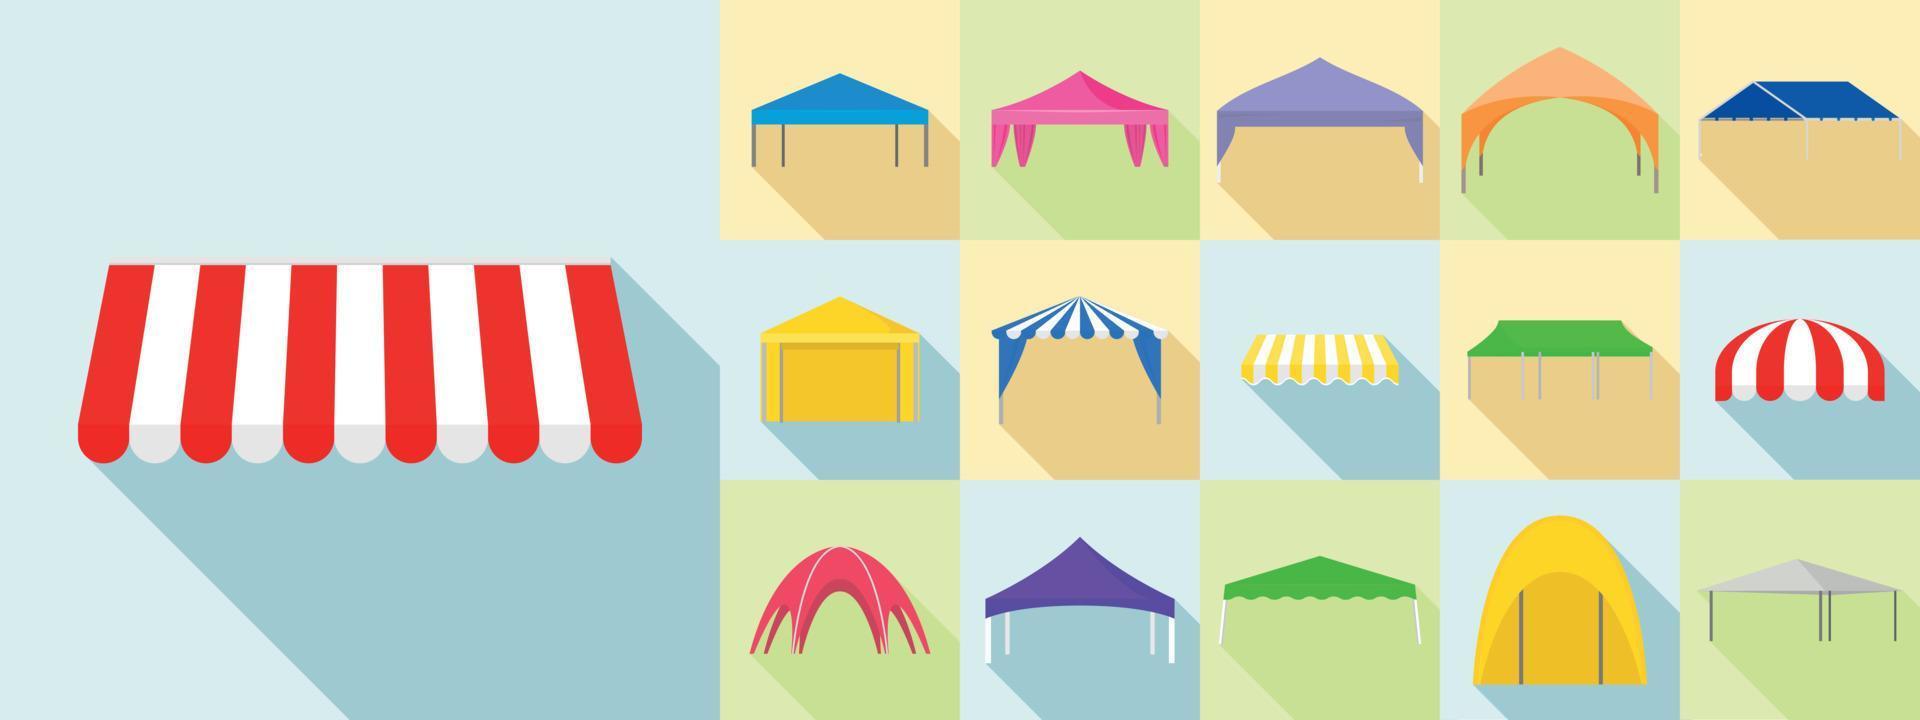 Canopy icons set, flat style vector